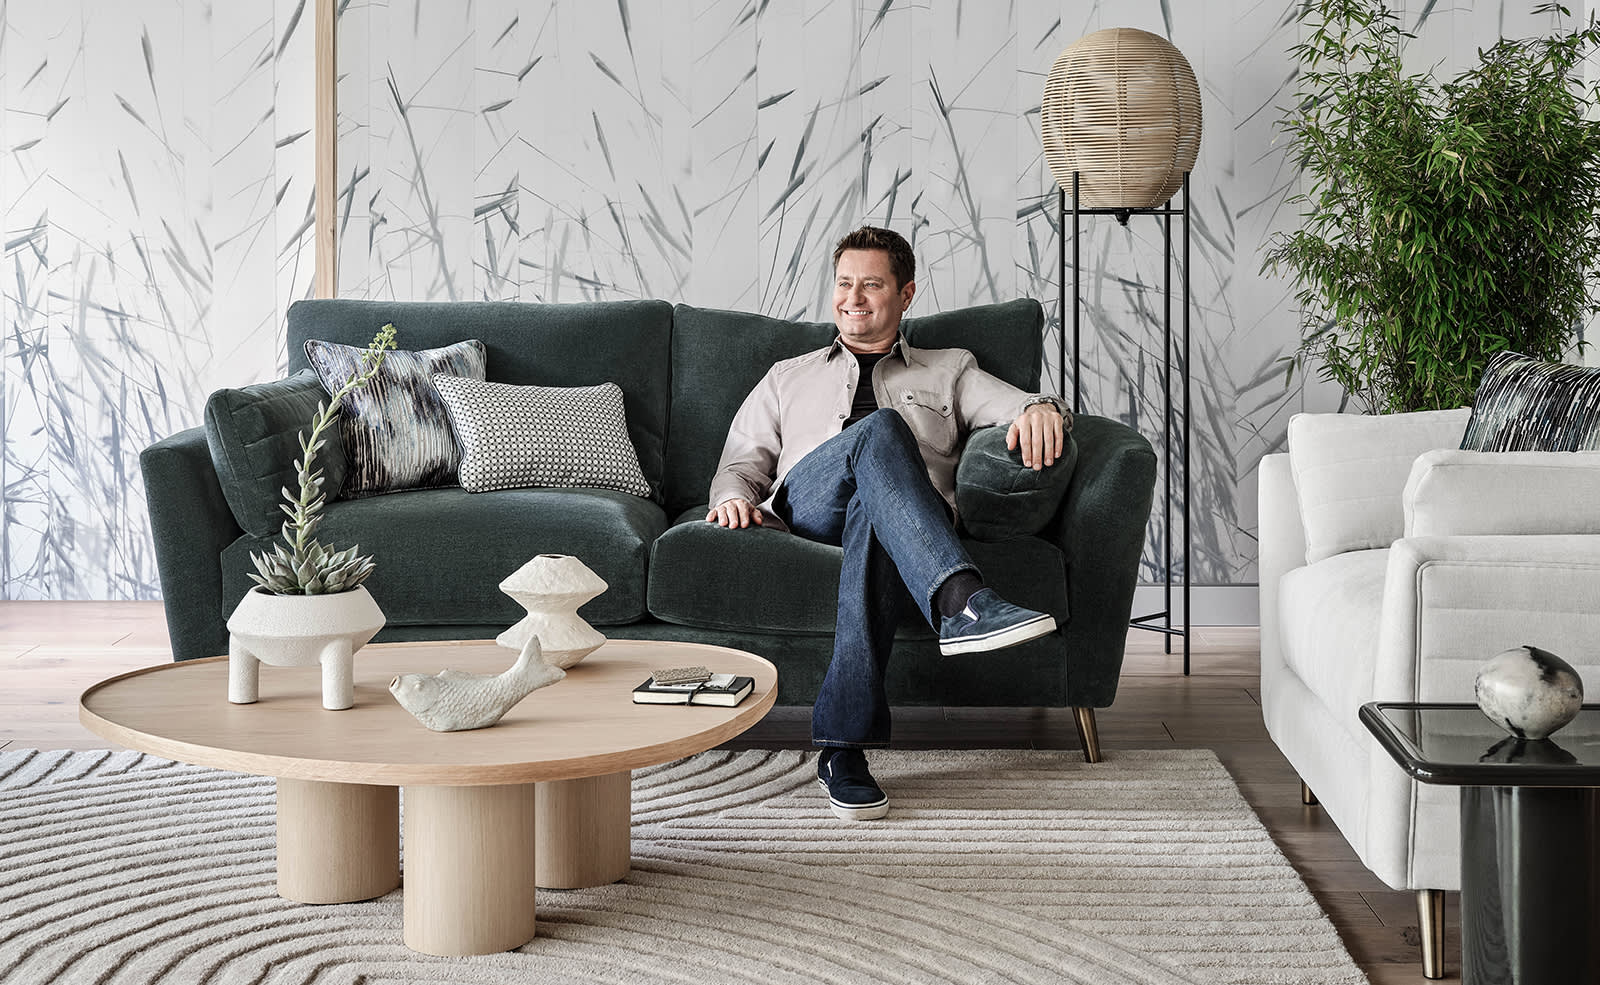 George Clarke at Sofology